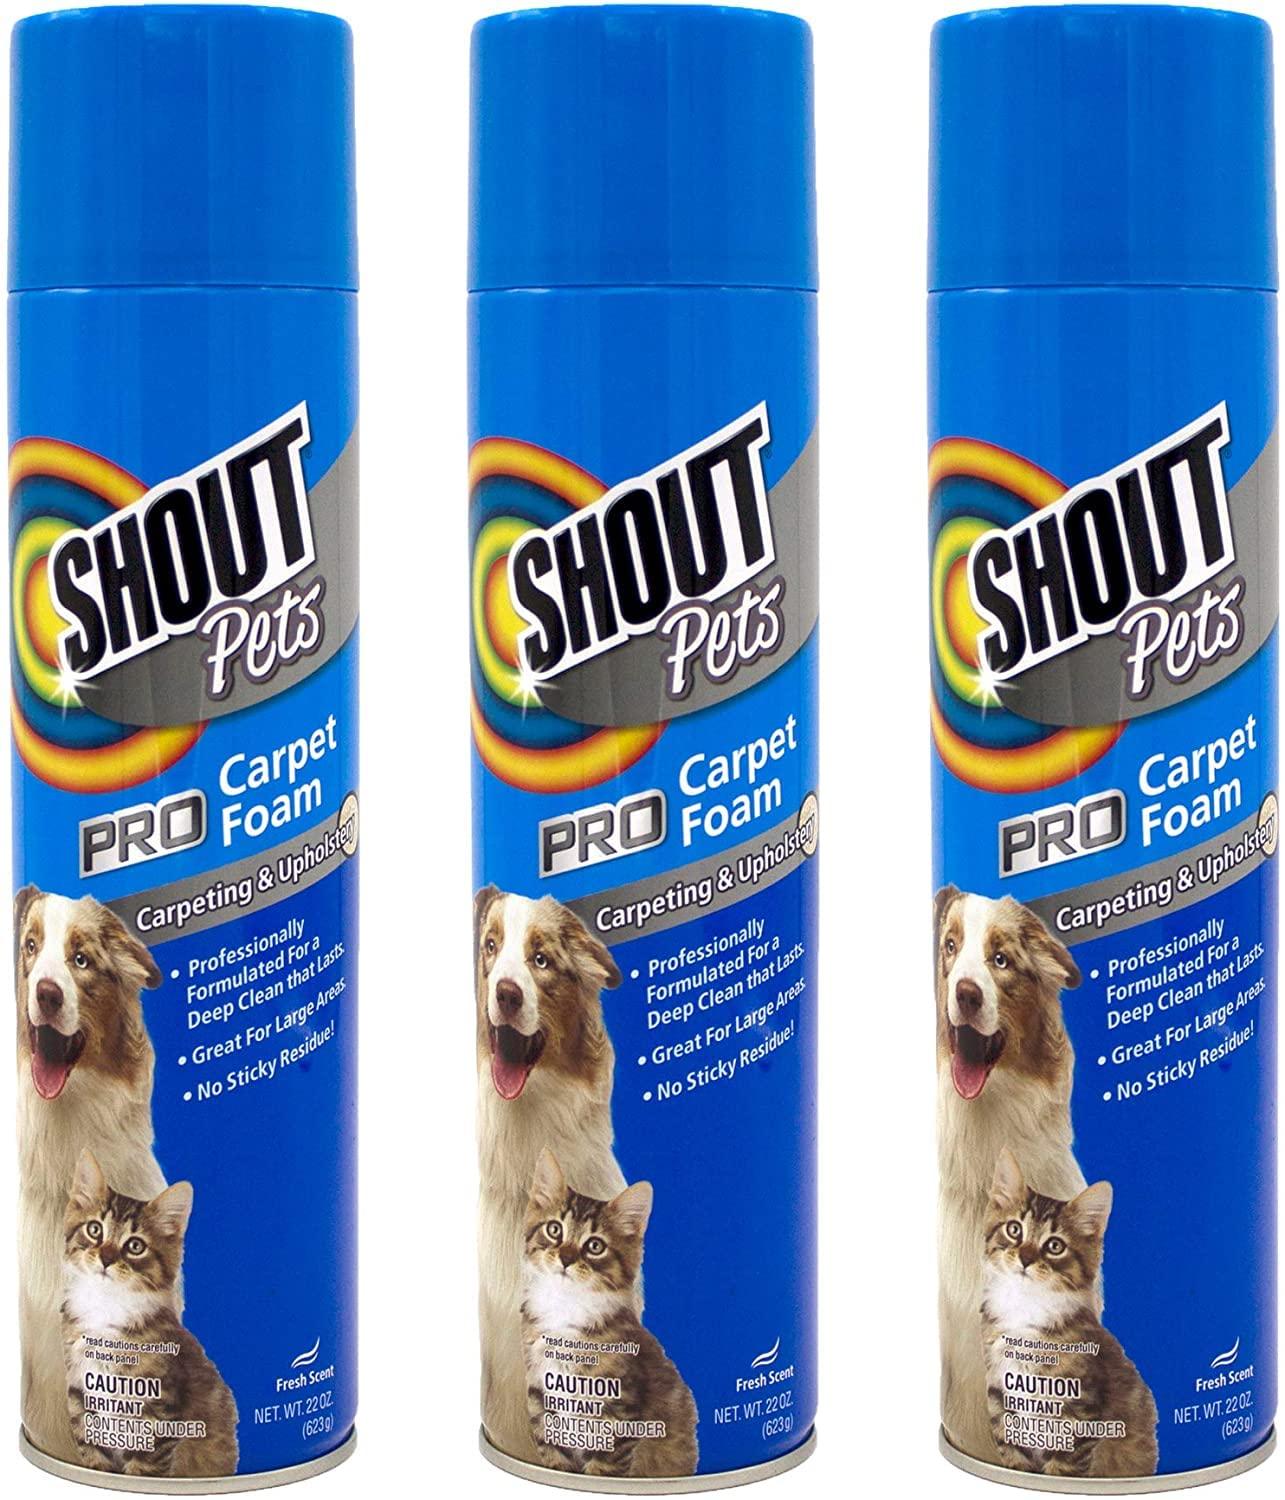 Shout for Pets Odor and Urine Remover - Effective Way to Remove Puppy & Dog Odors and Stains from Carpets & Rugs - Shout Pet Urine Remover, Shout Stain Remover for Pets